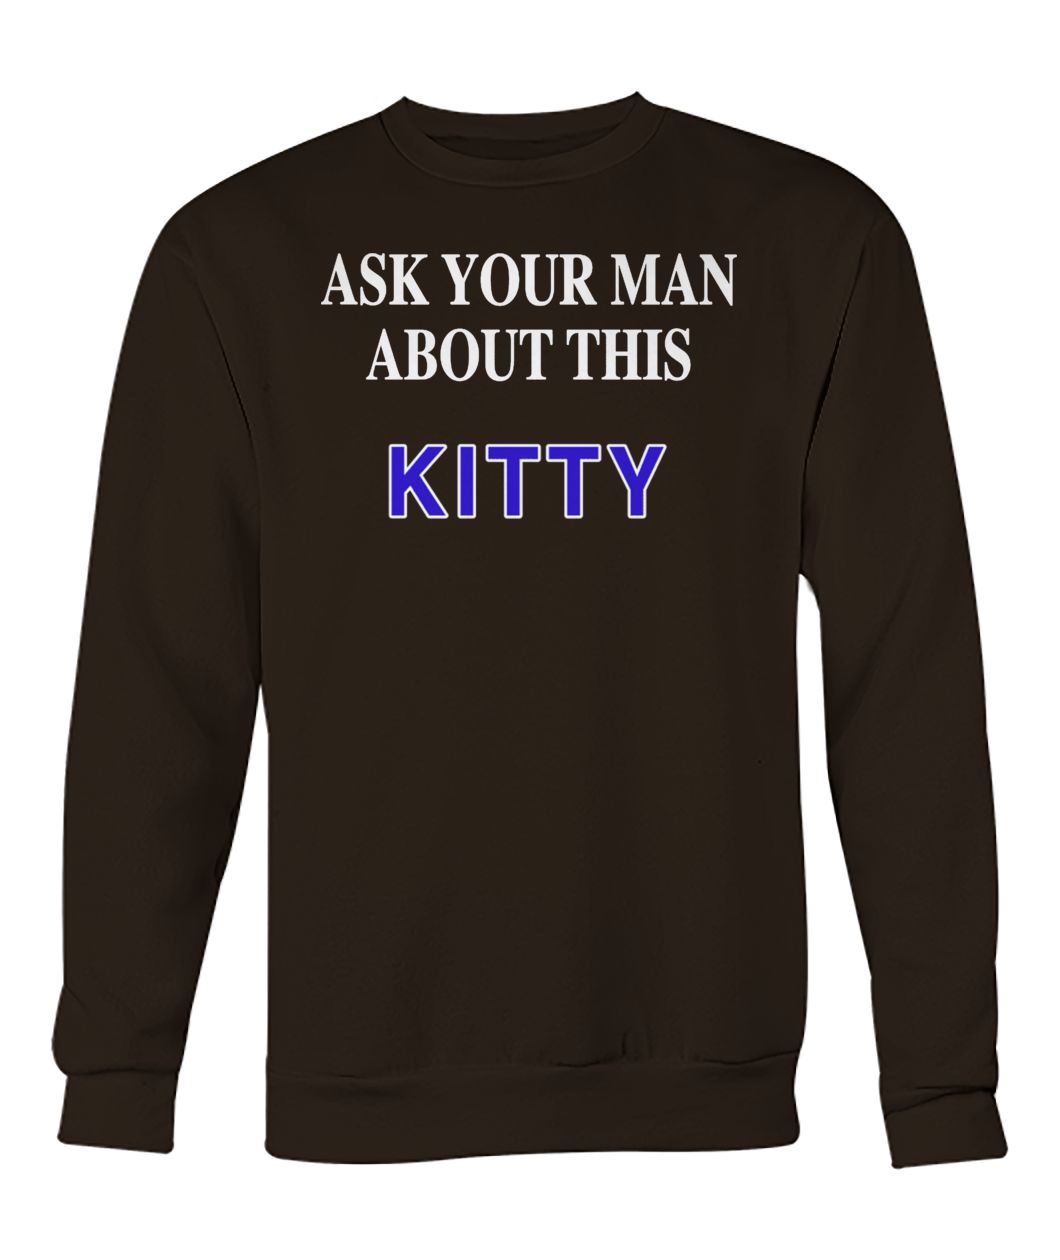 Ask your man about this kitty crew neck sweatshirt